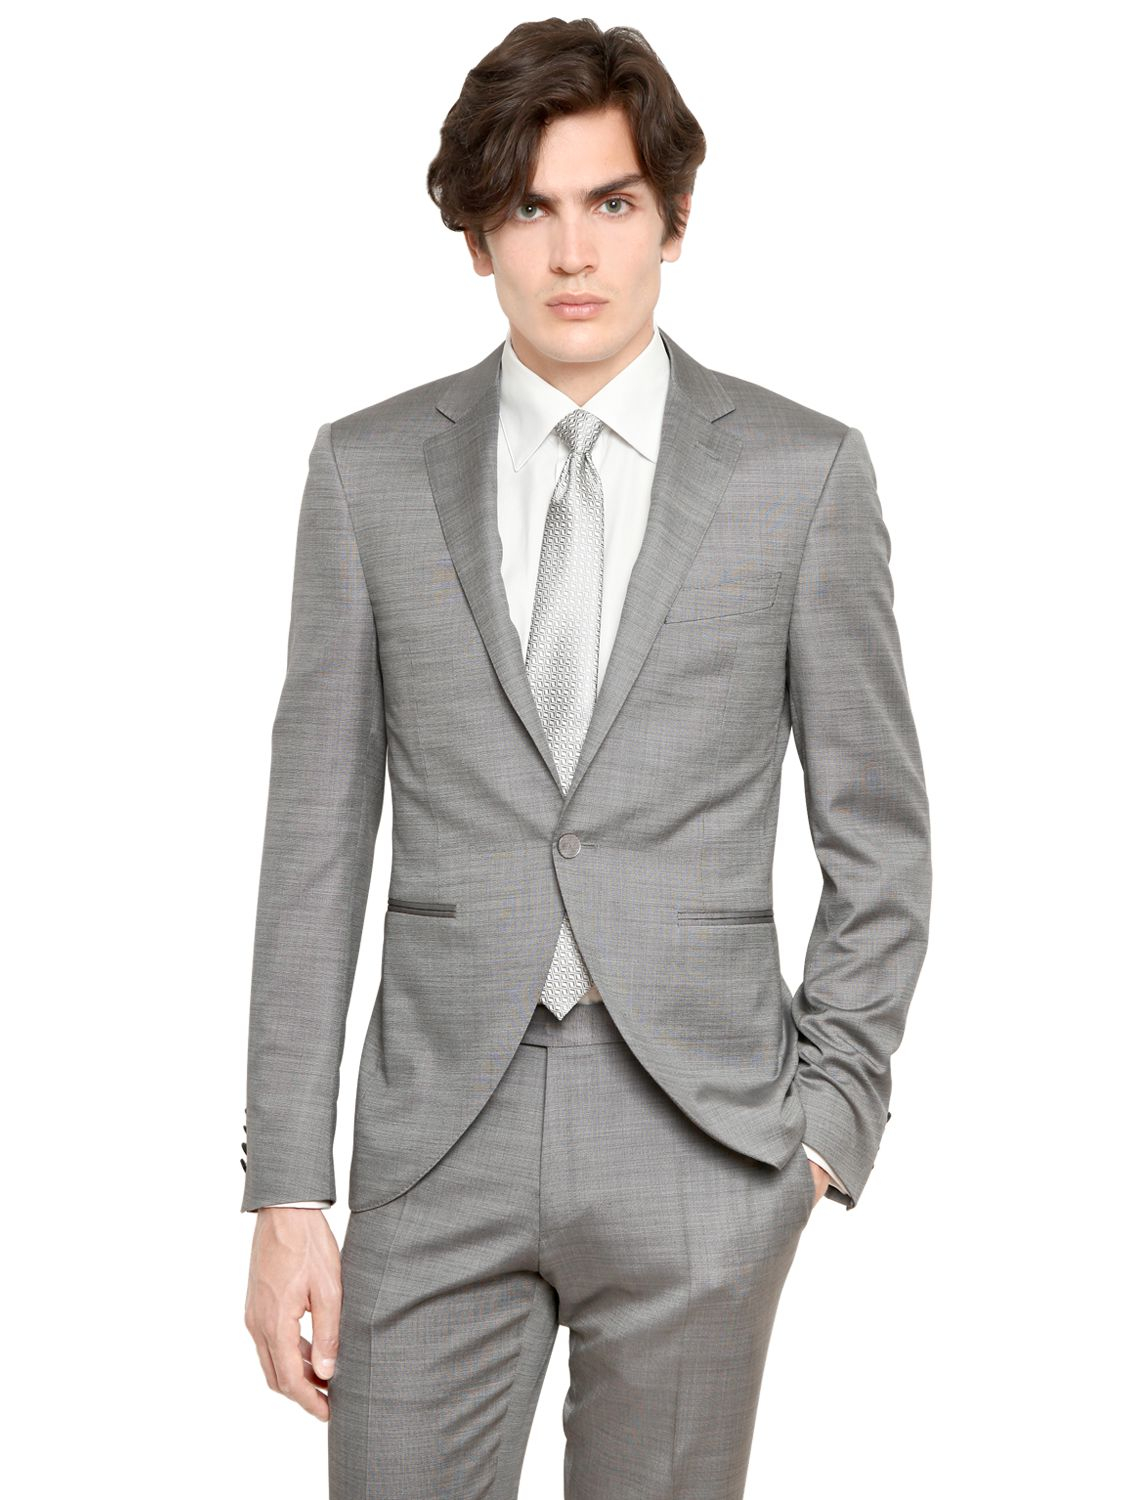 Mens Suits With Shorts / Wedding Suit Blog: The Best Suits For Short ...